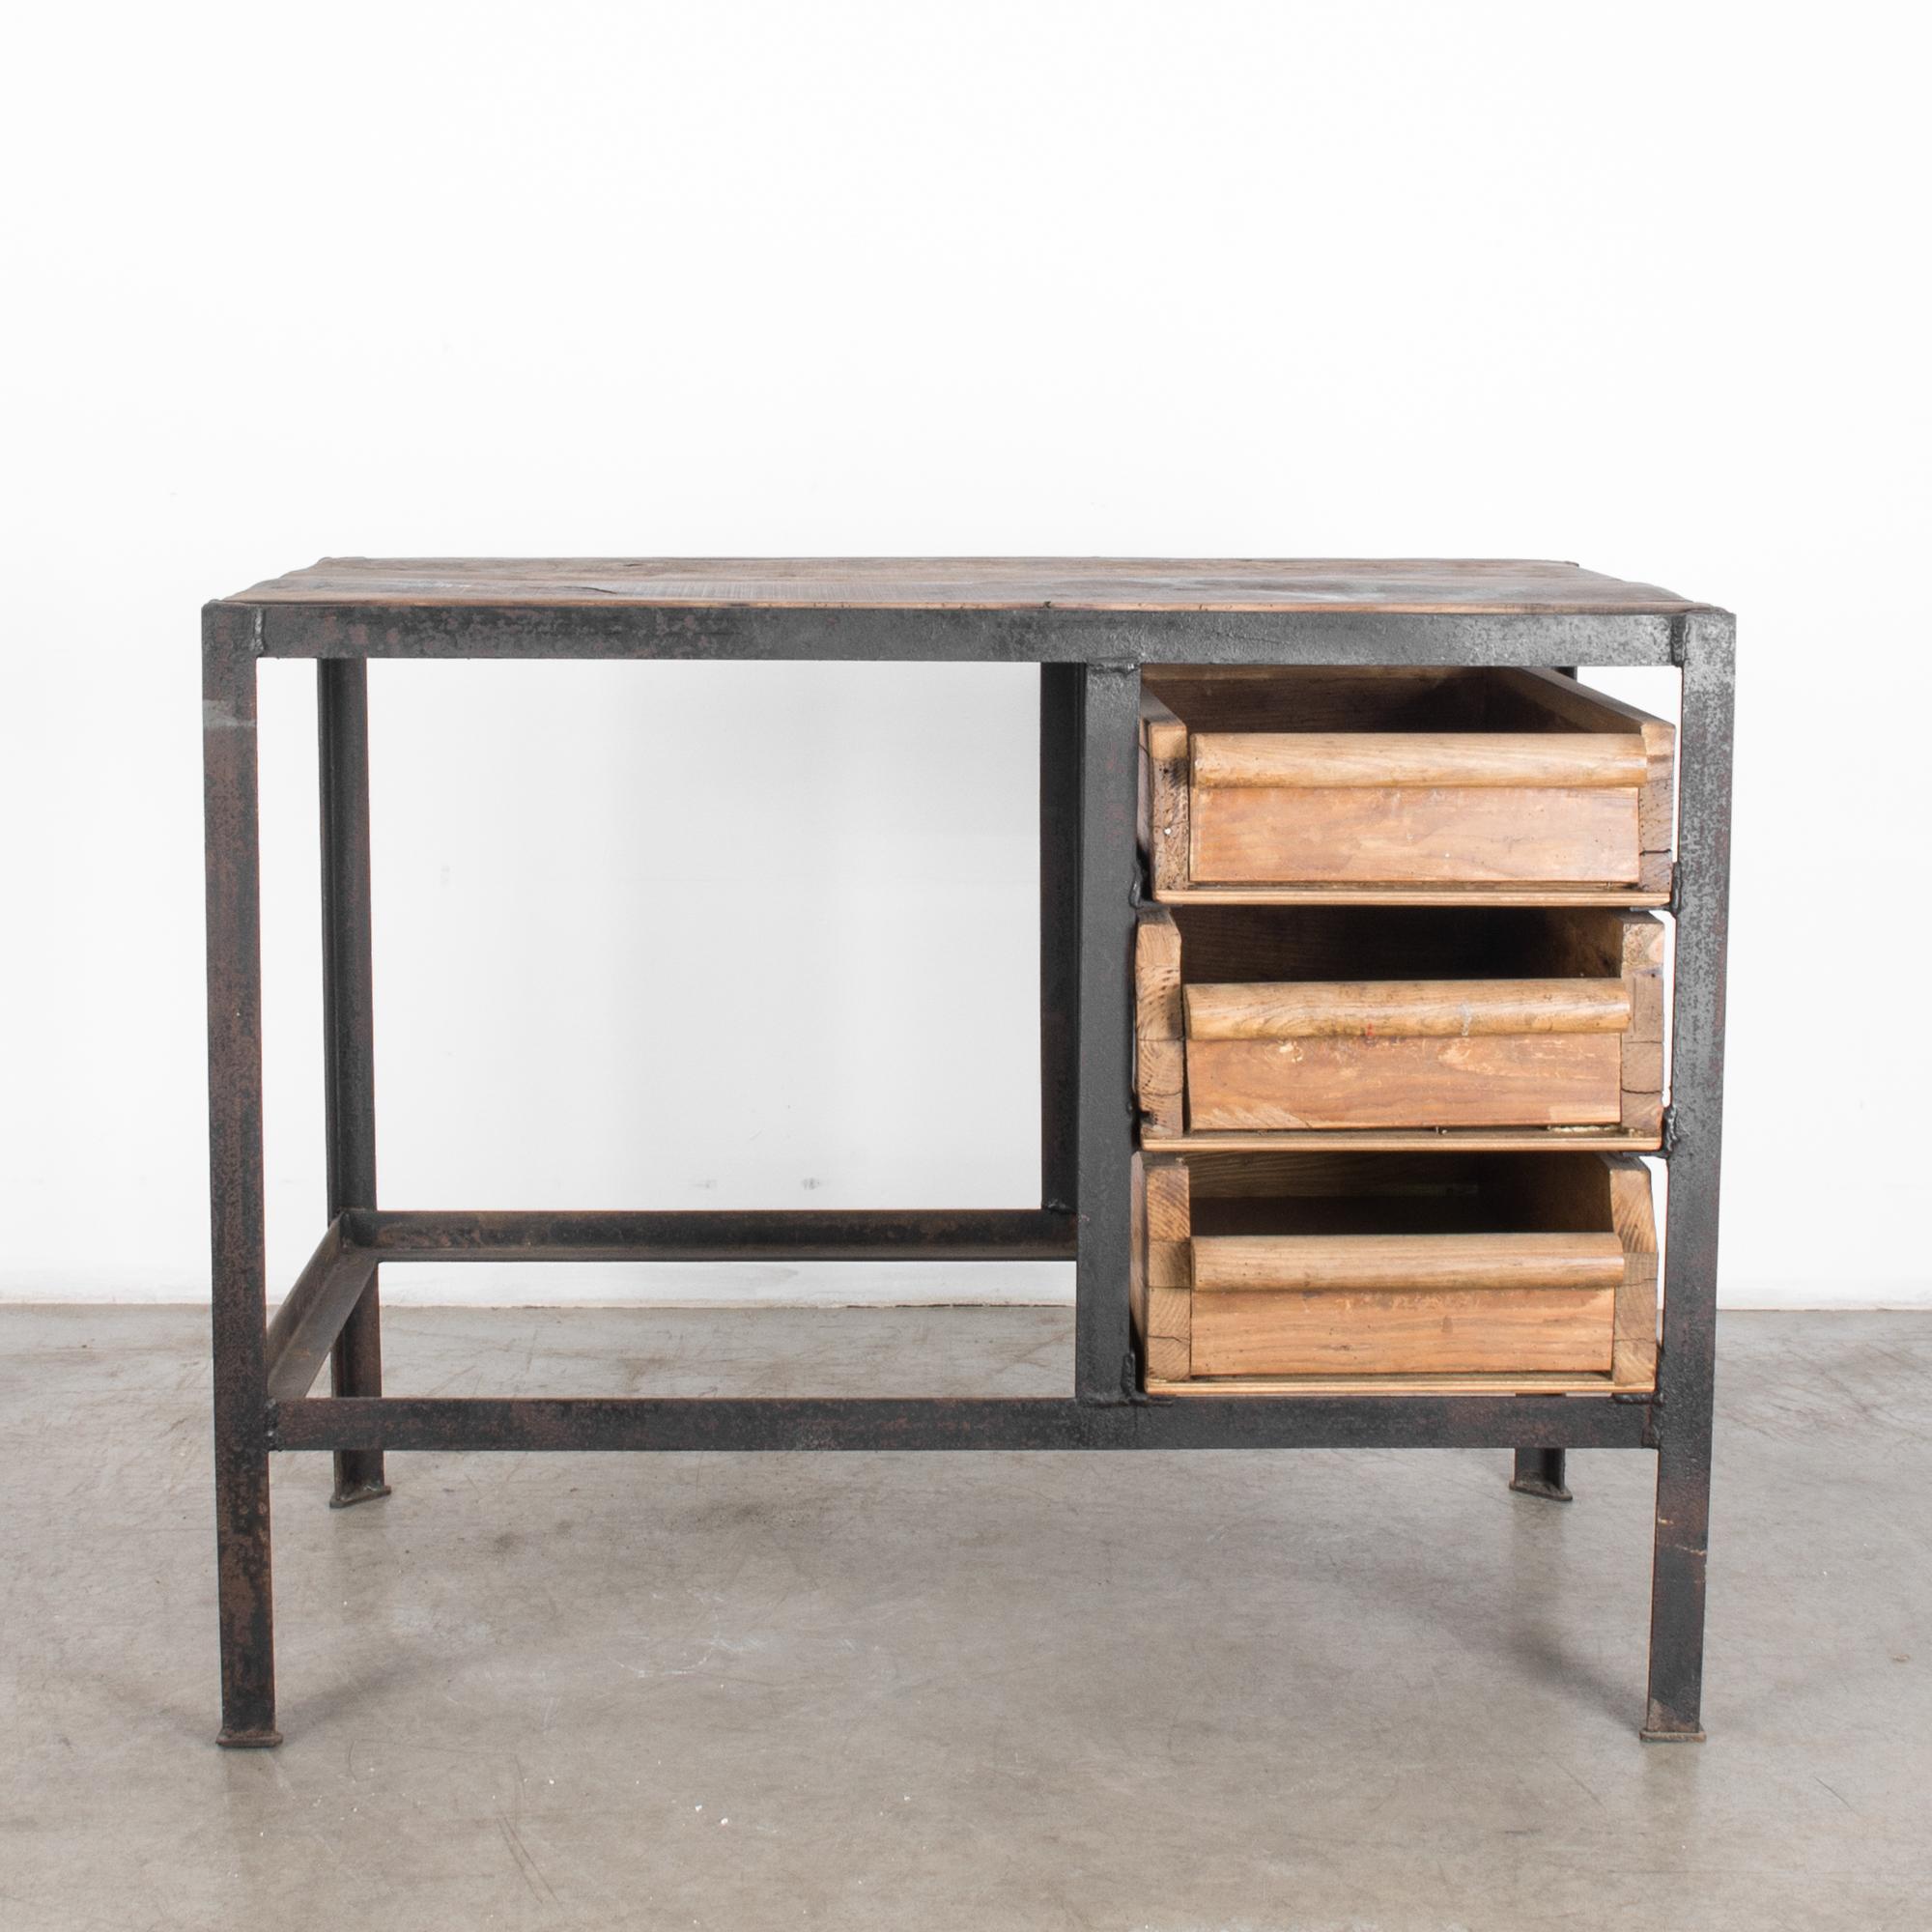 This fully functional worktable was made in France, circa 1920. The beautifully aged, rectangular metal frame has a distinctive industrial appearance and supports three rustic and solid wooden drawers on one side. A cylindrical pull stretches across